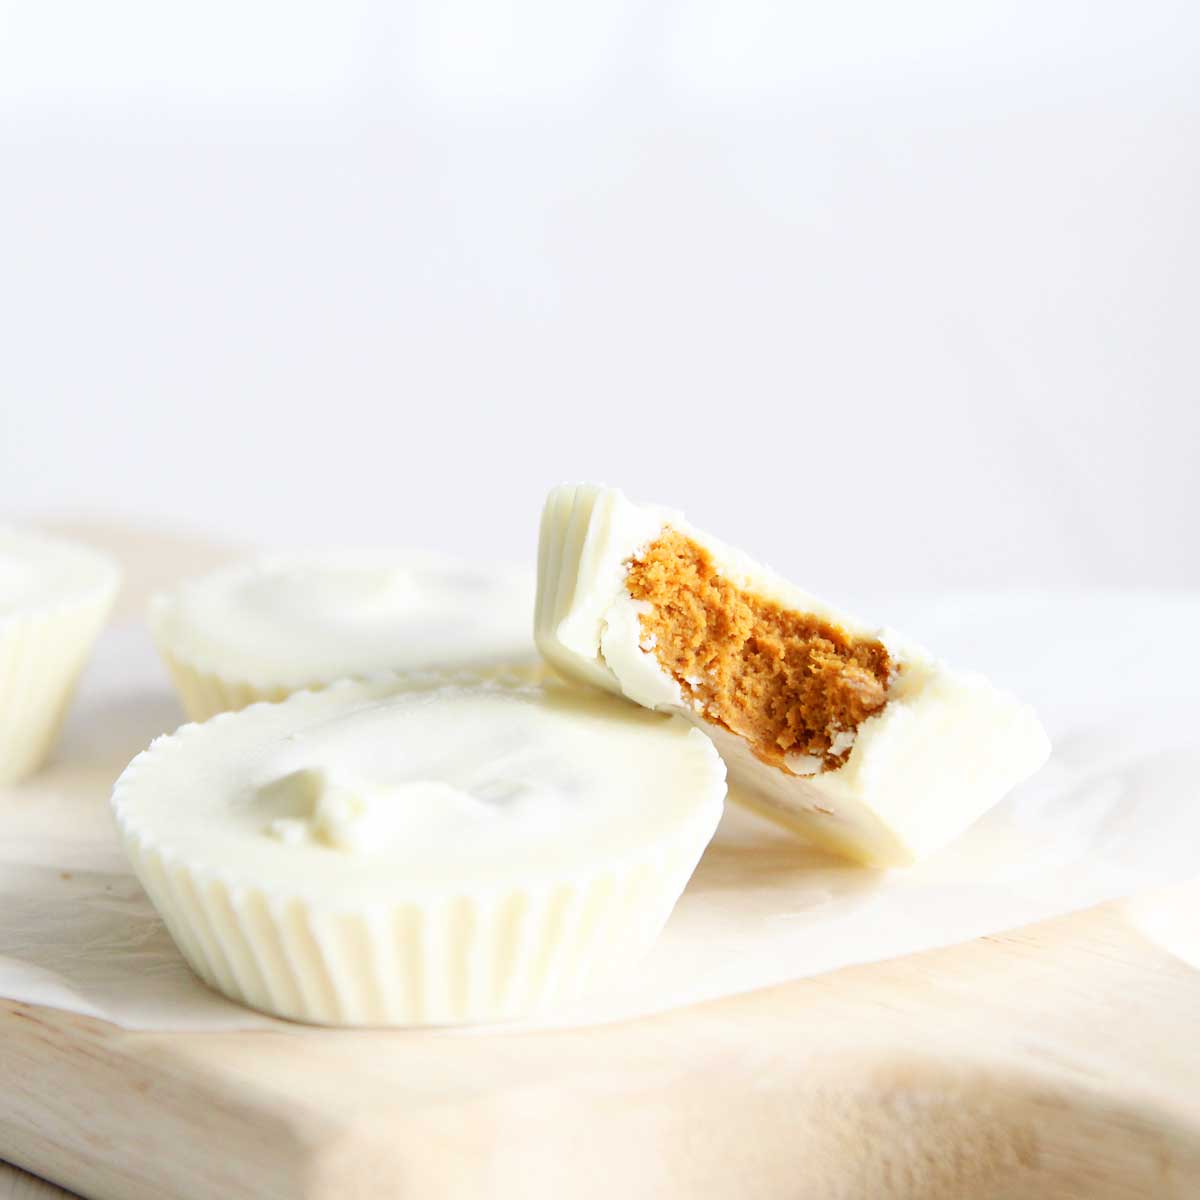 Healthy Pumpkin Spice Peanut Butter Cups Recipe made with PB Powder - Peanut Clusters with Collagen